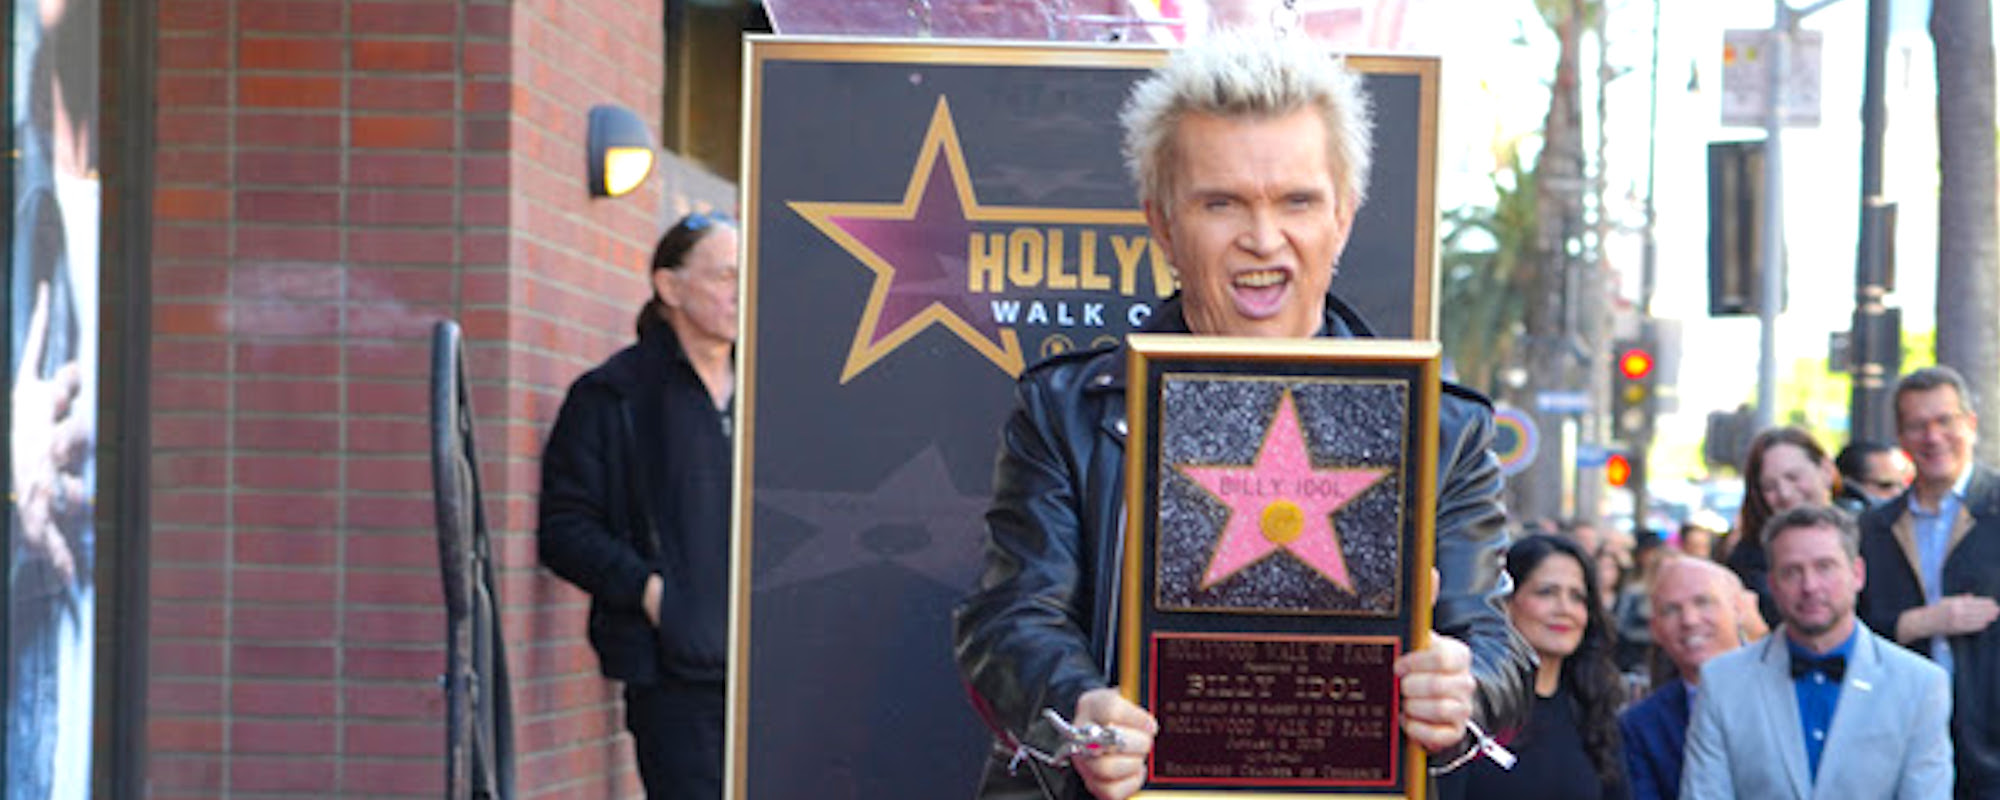 Billy Idol Receives Star on the Hollywood Walk of Fame